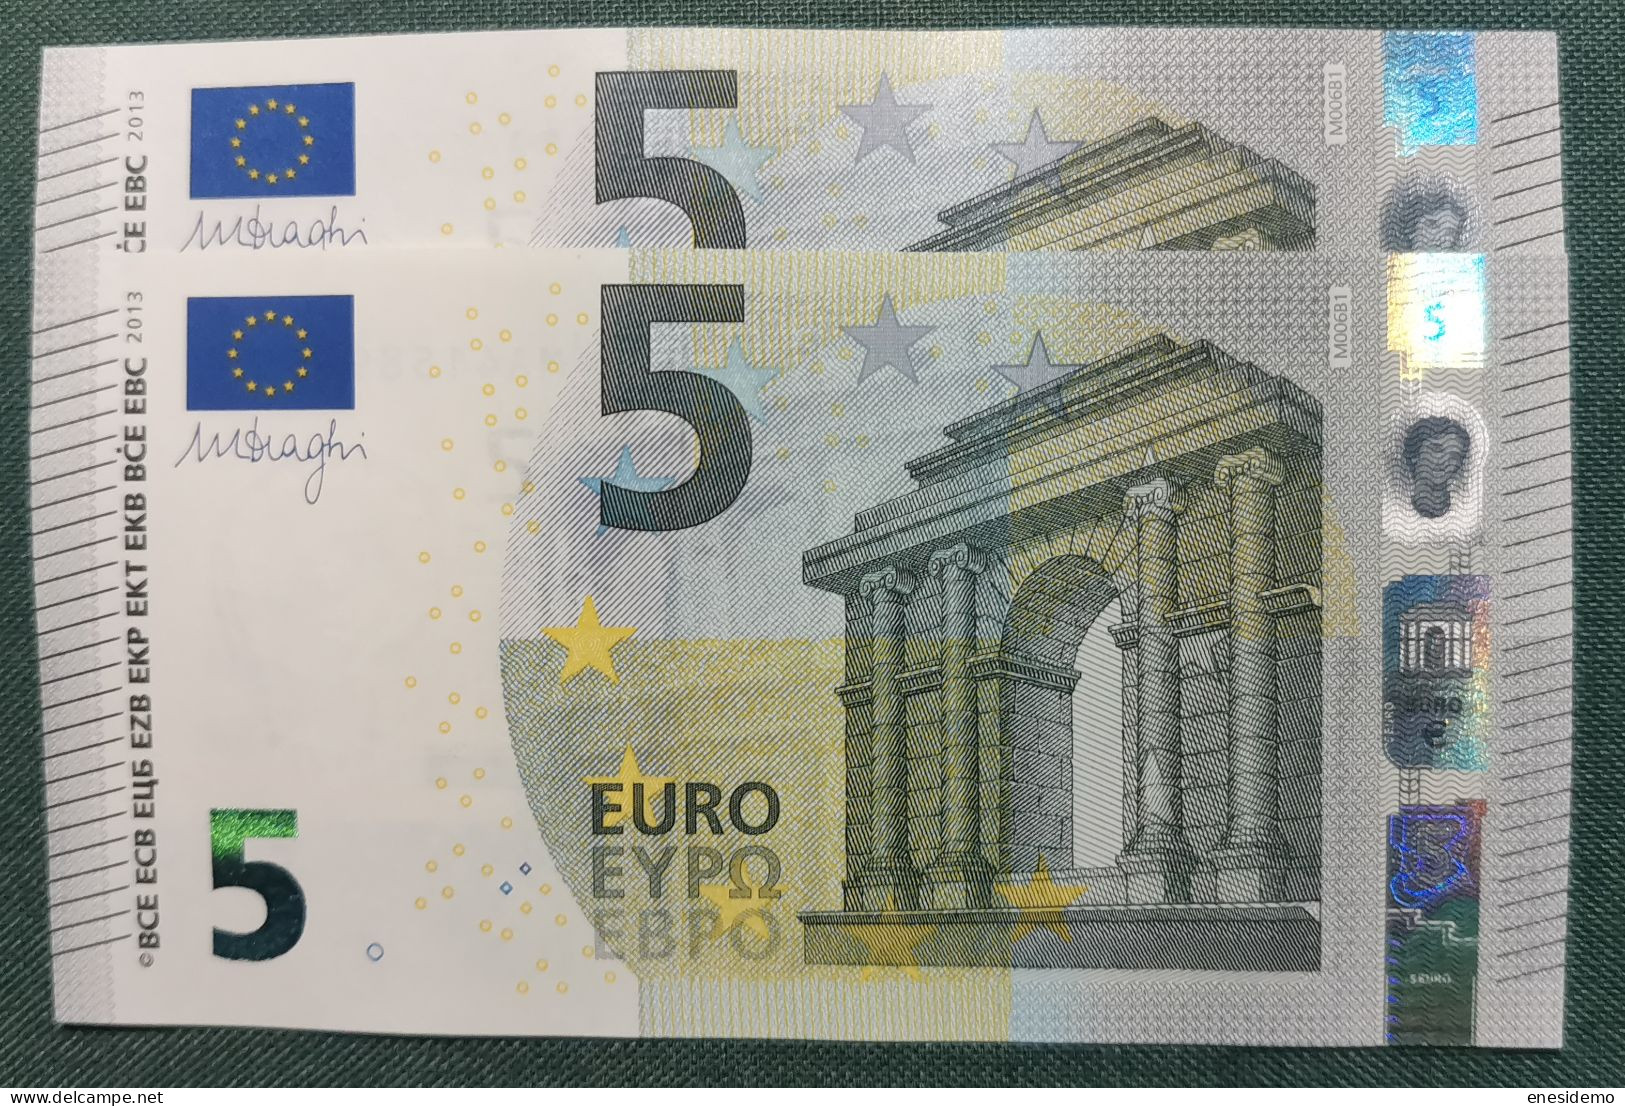 5 EURO PORTUGAL 2013 DRAGHI M006B1 MA CORRELATIVE COUPLE UNEVEN NICE NUMBER FOUR CONSECUTIVE NINES SC FDS UNC. PERFECT - 5 Euro